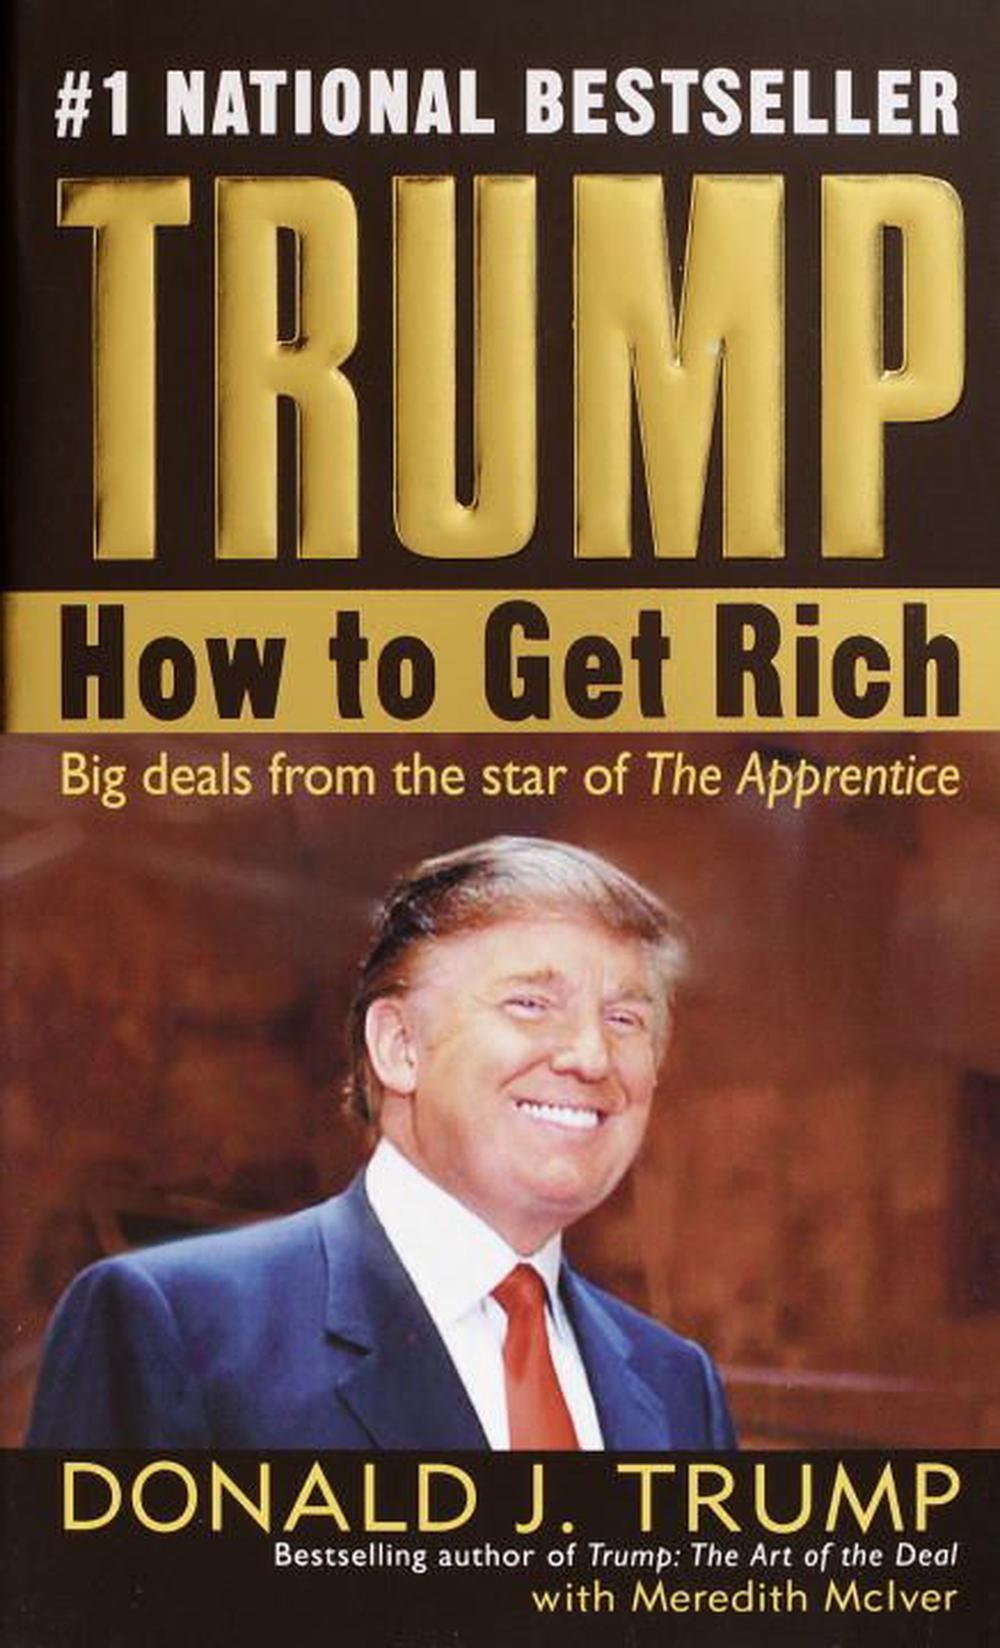 Trump: How to Get Rich (Paperback) - image 1 of 1